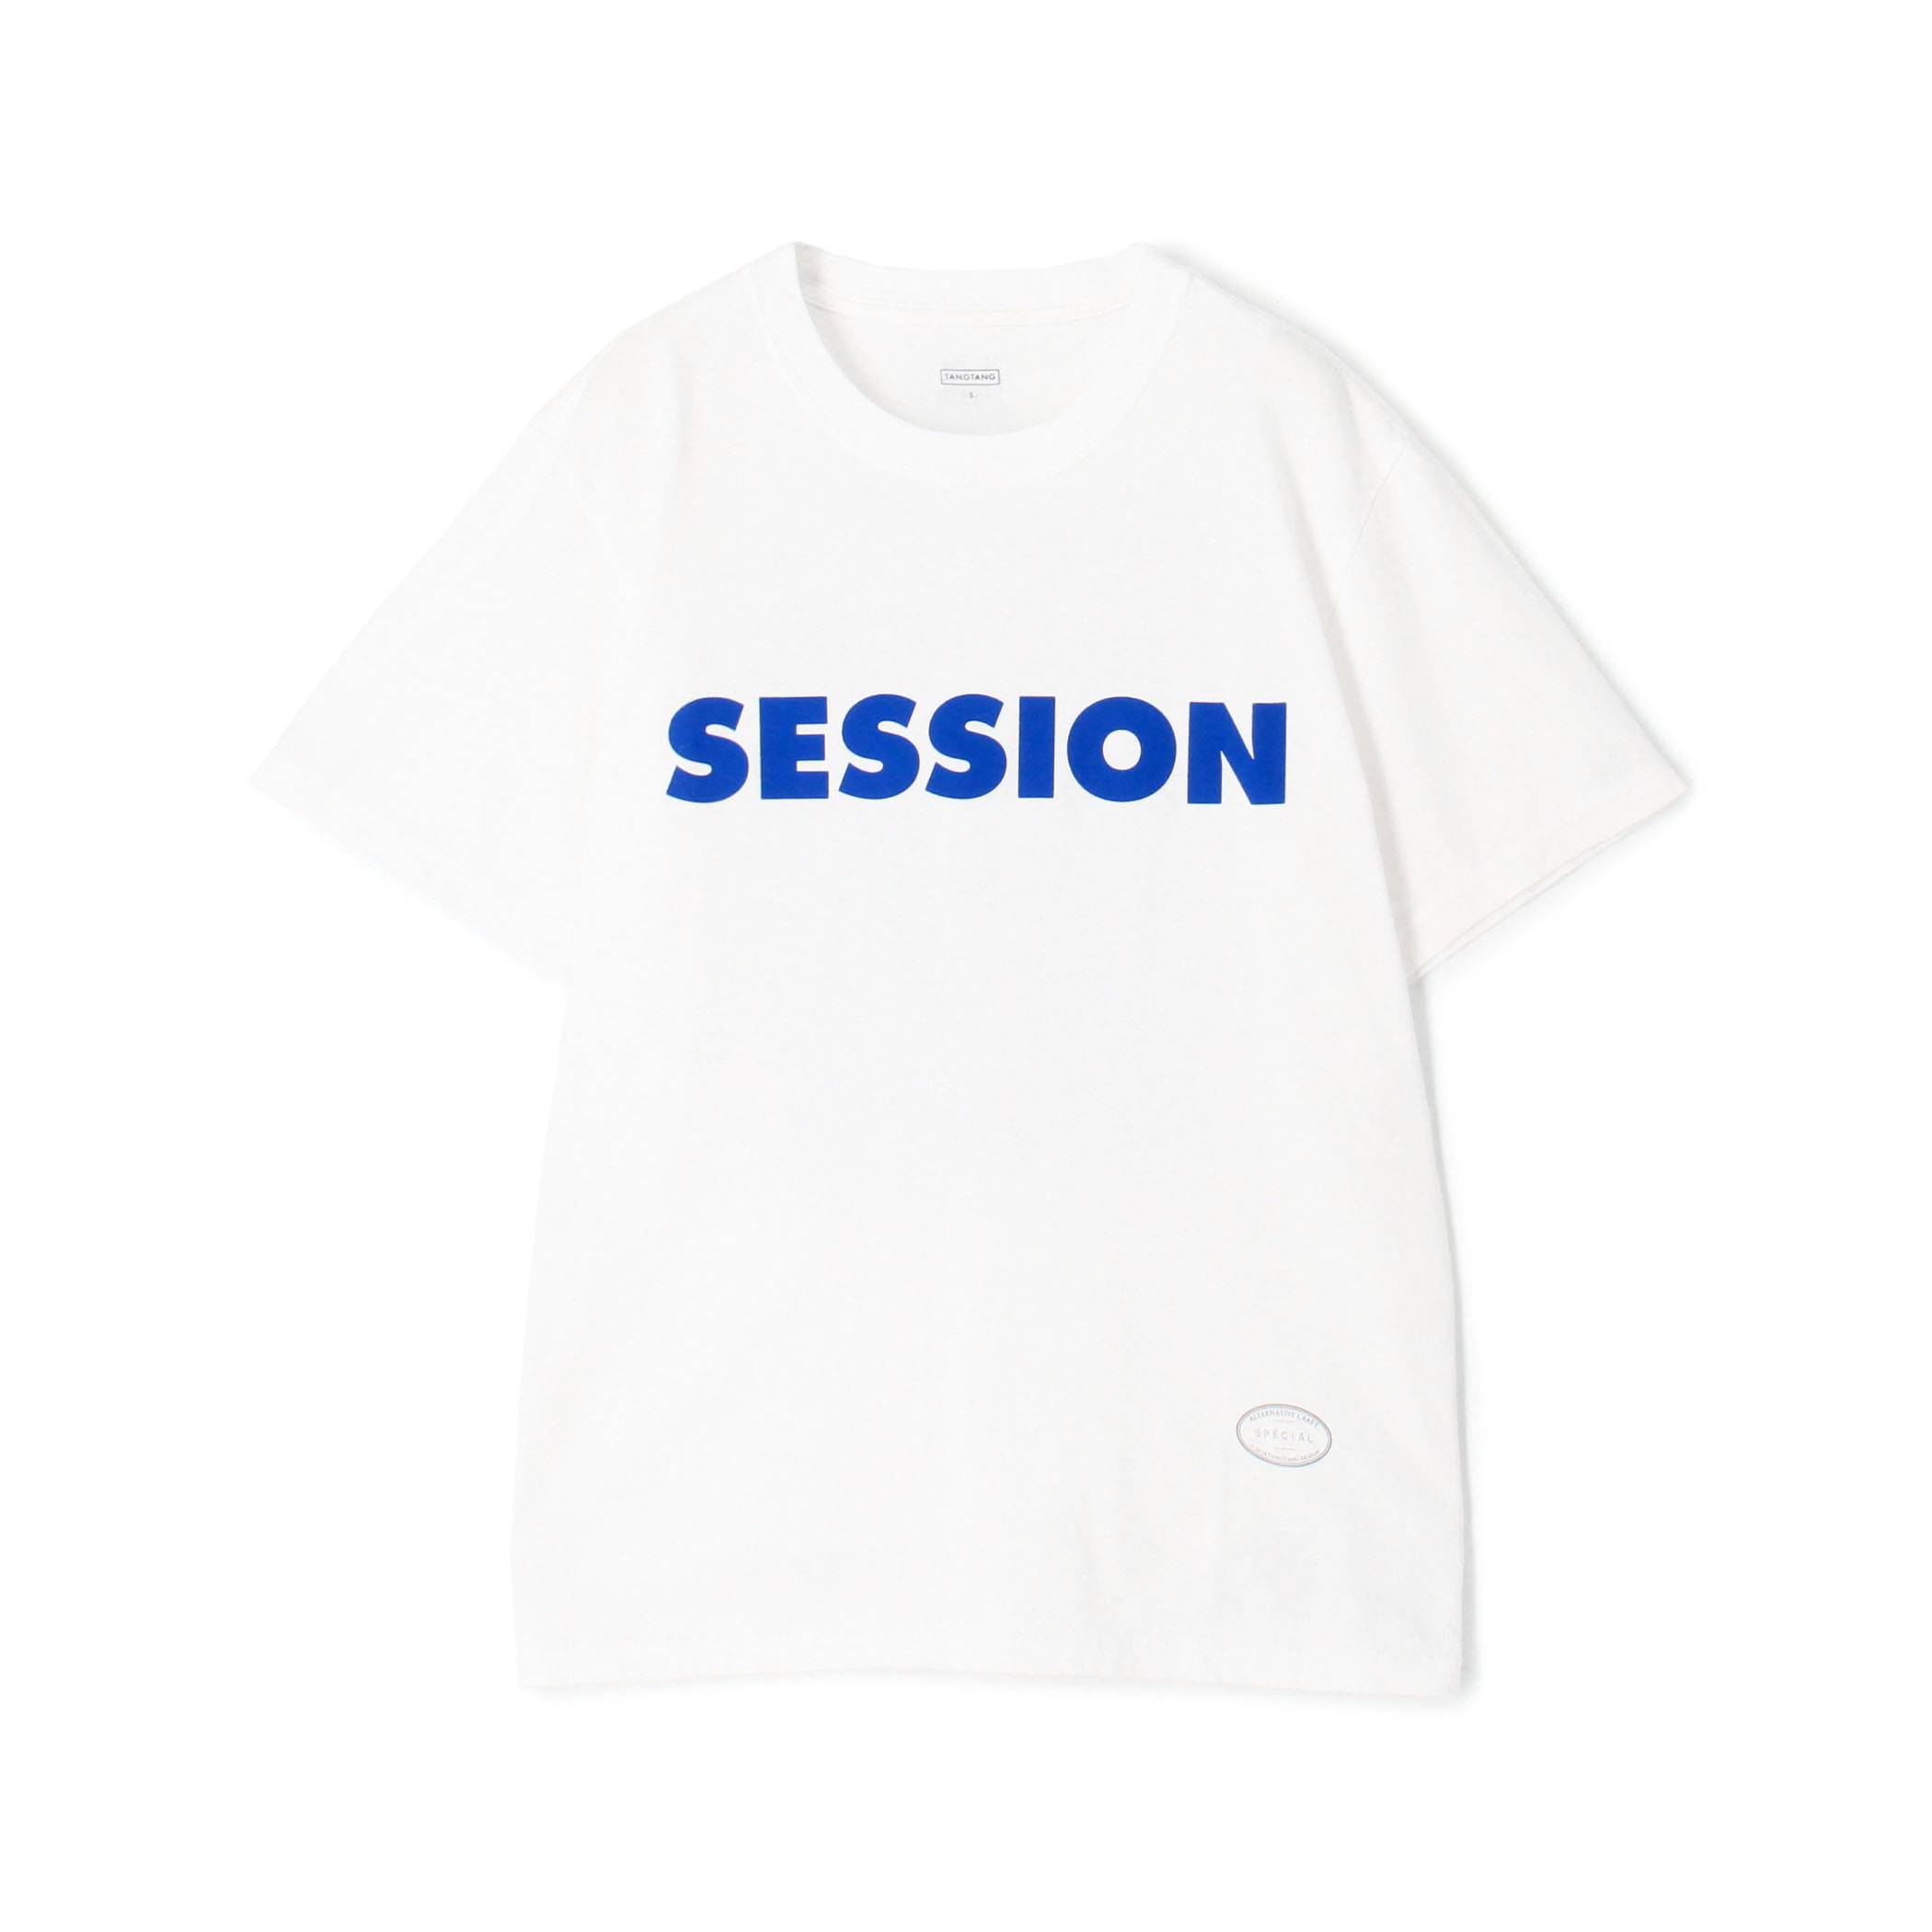 TANG TANG AIN'T SESSION Tシャツ